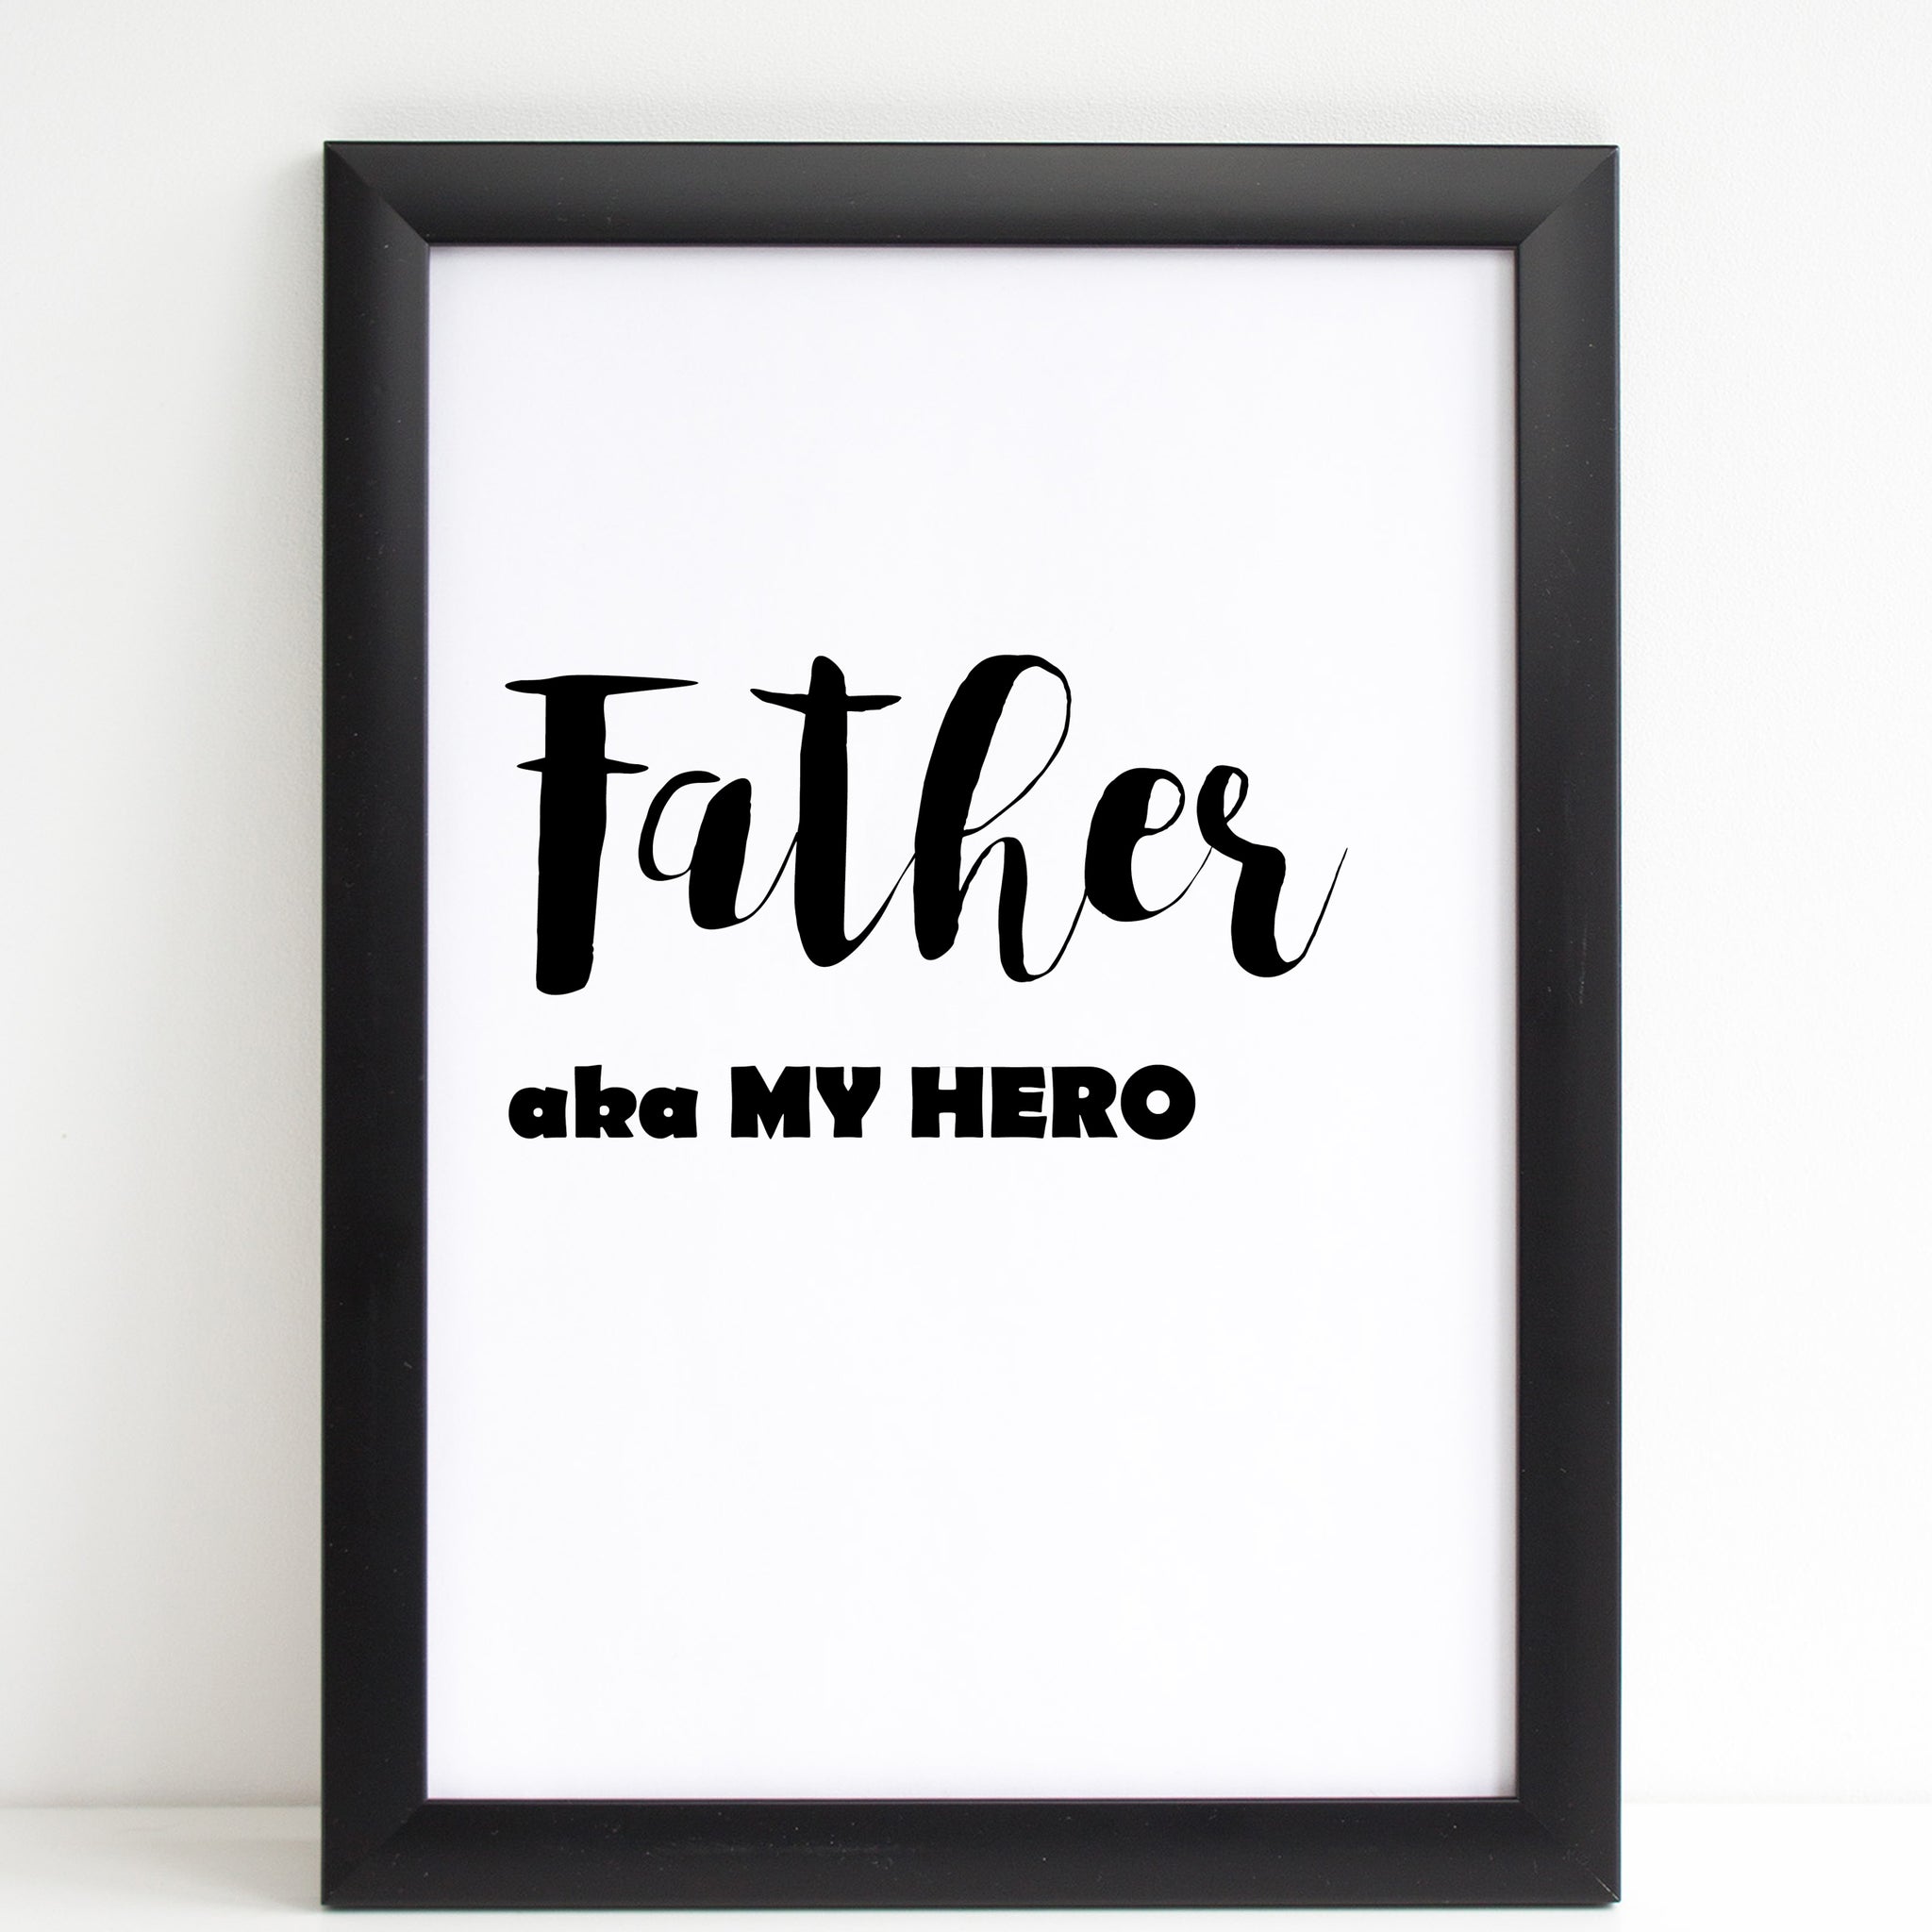 Fathers Day Print 'Father aka My Hero' Fun Poster Gift for Dad